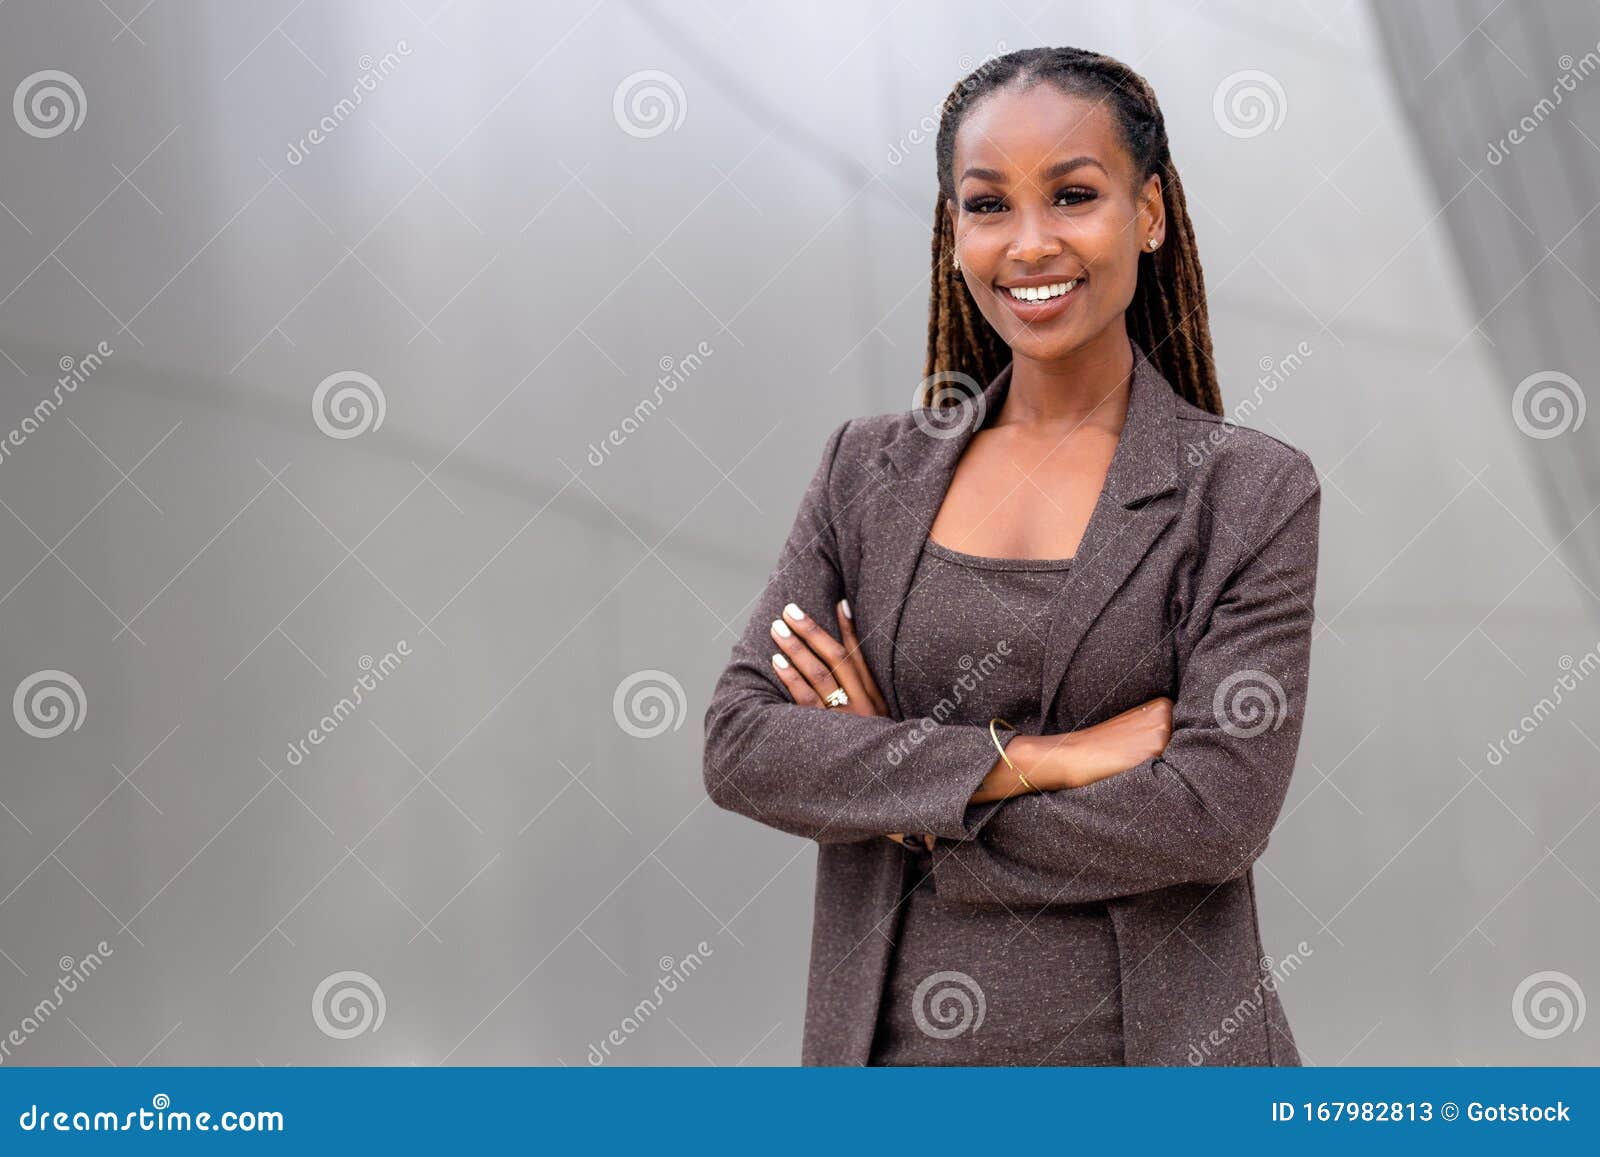 warm, friendly, beautiful cheerful african american executive business woman at the workspace office